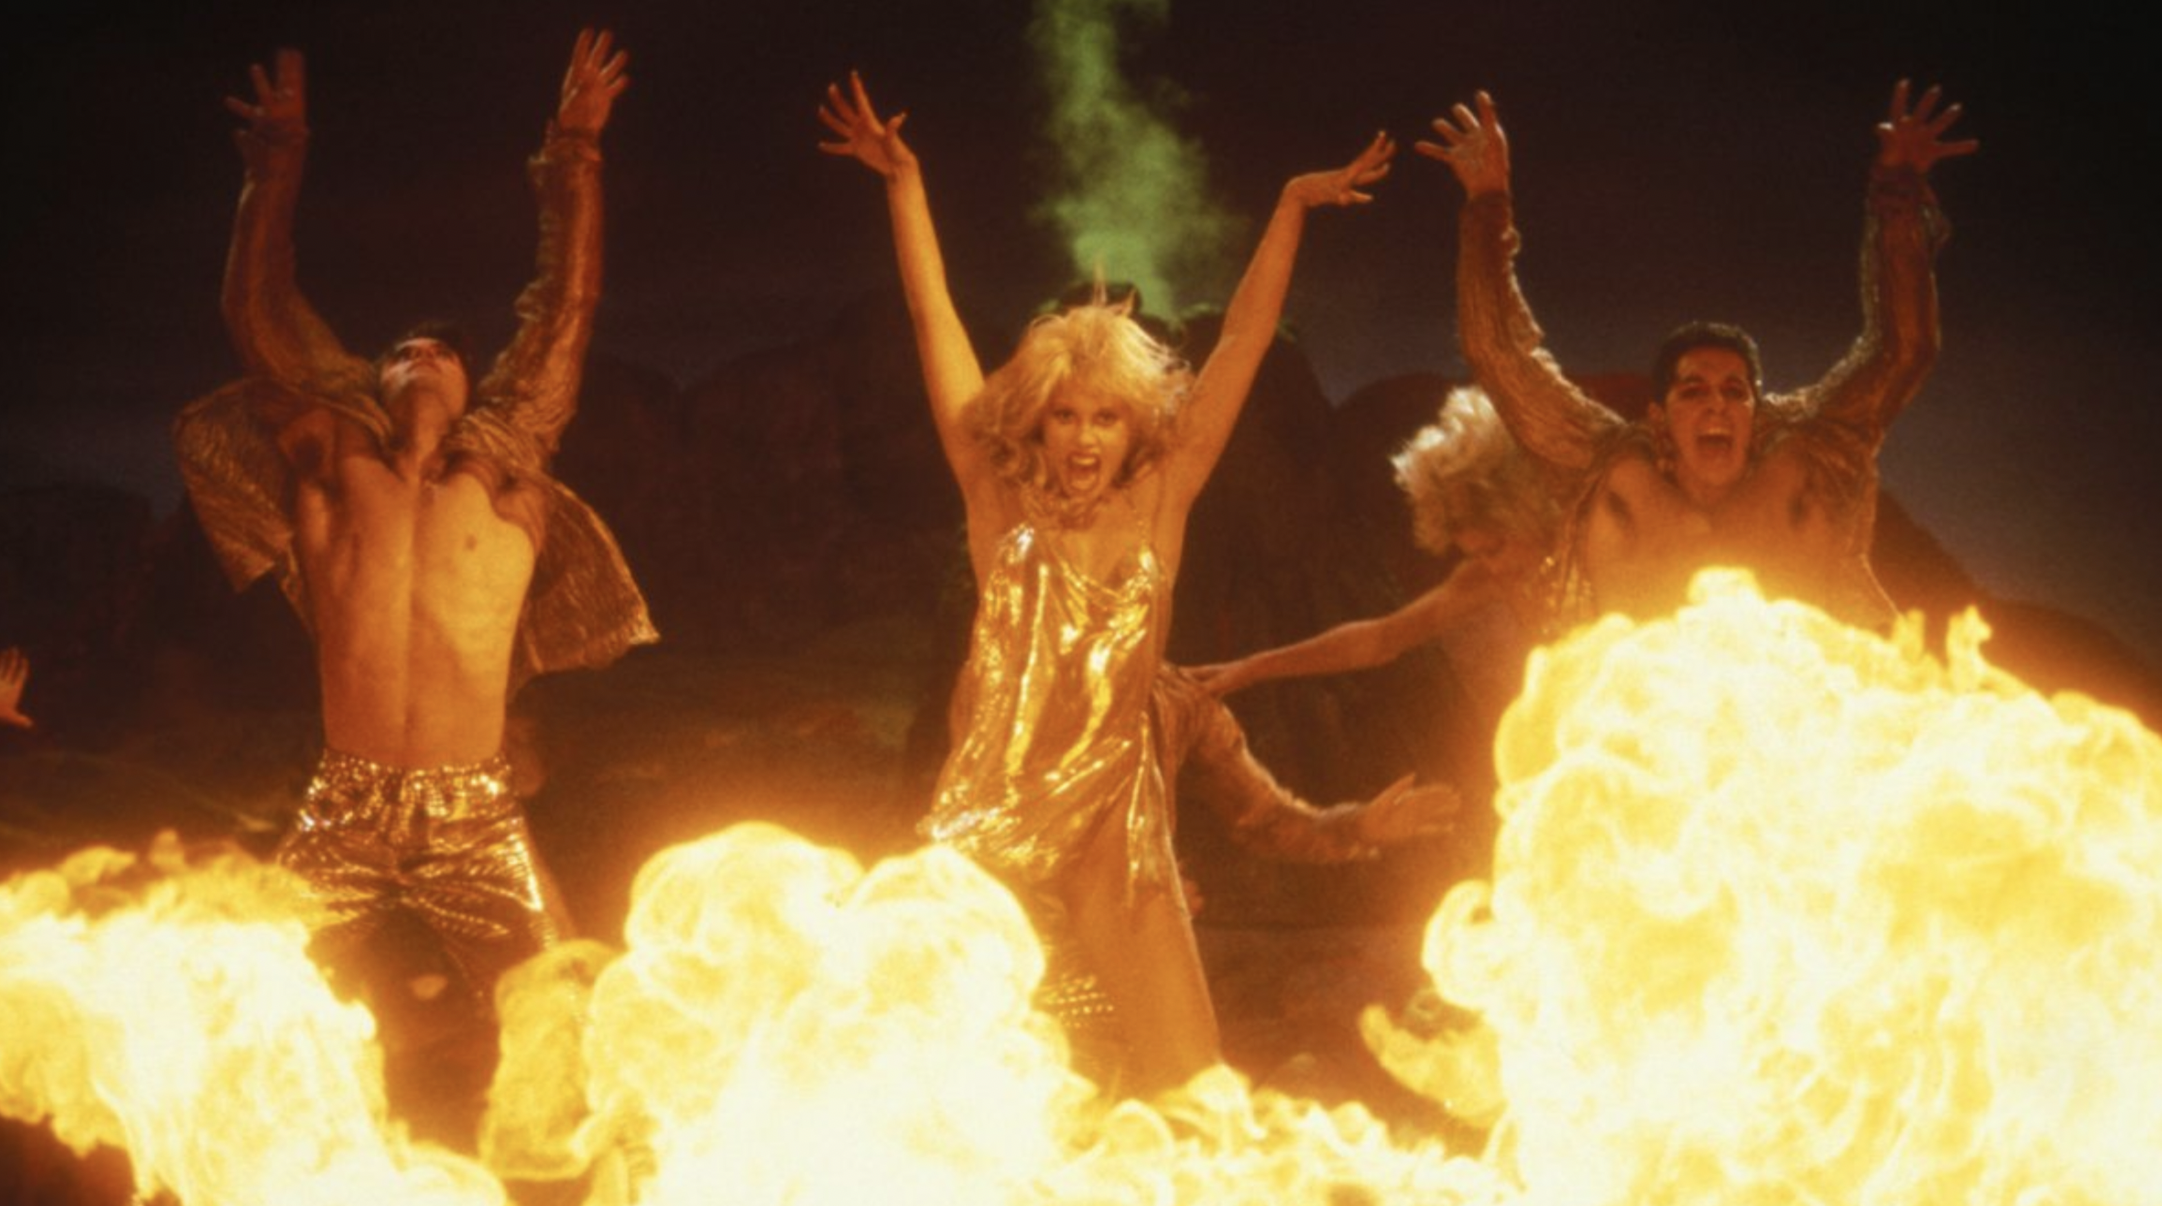 Three dancers jump and lunge over fire in the movie Showgirls